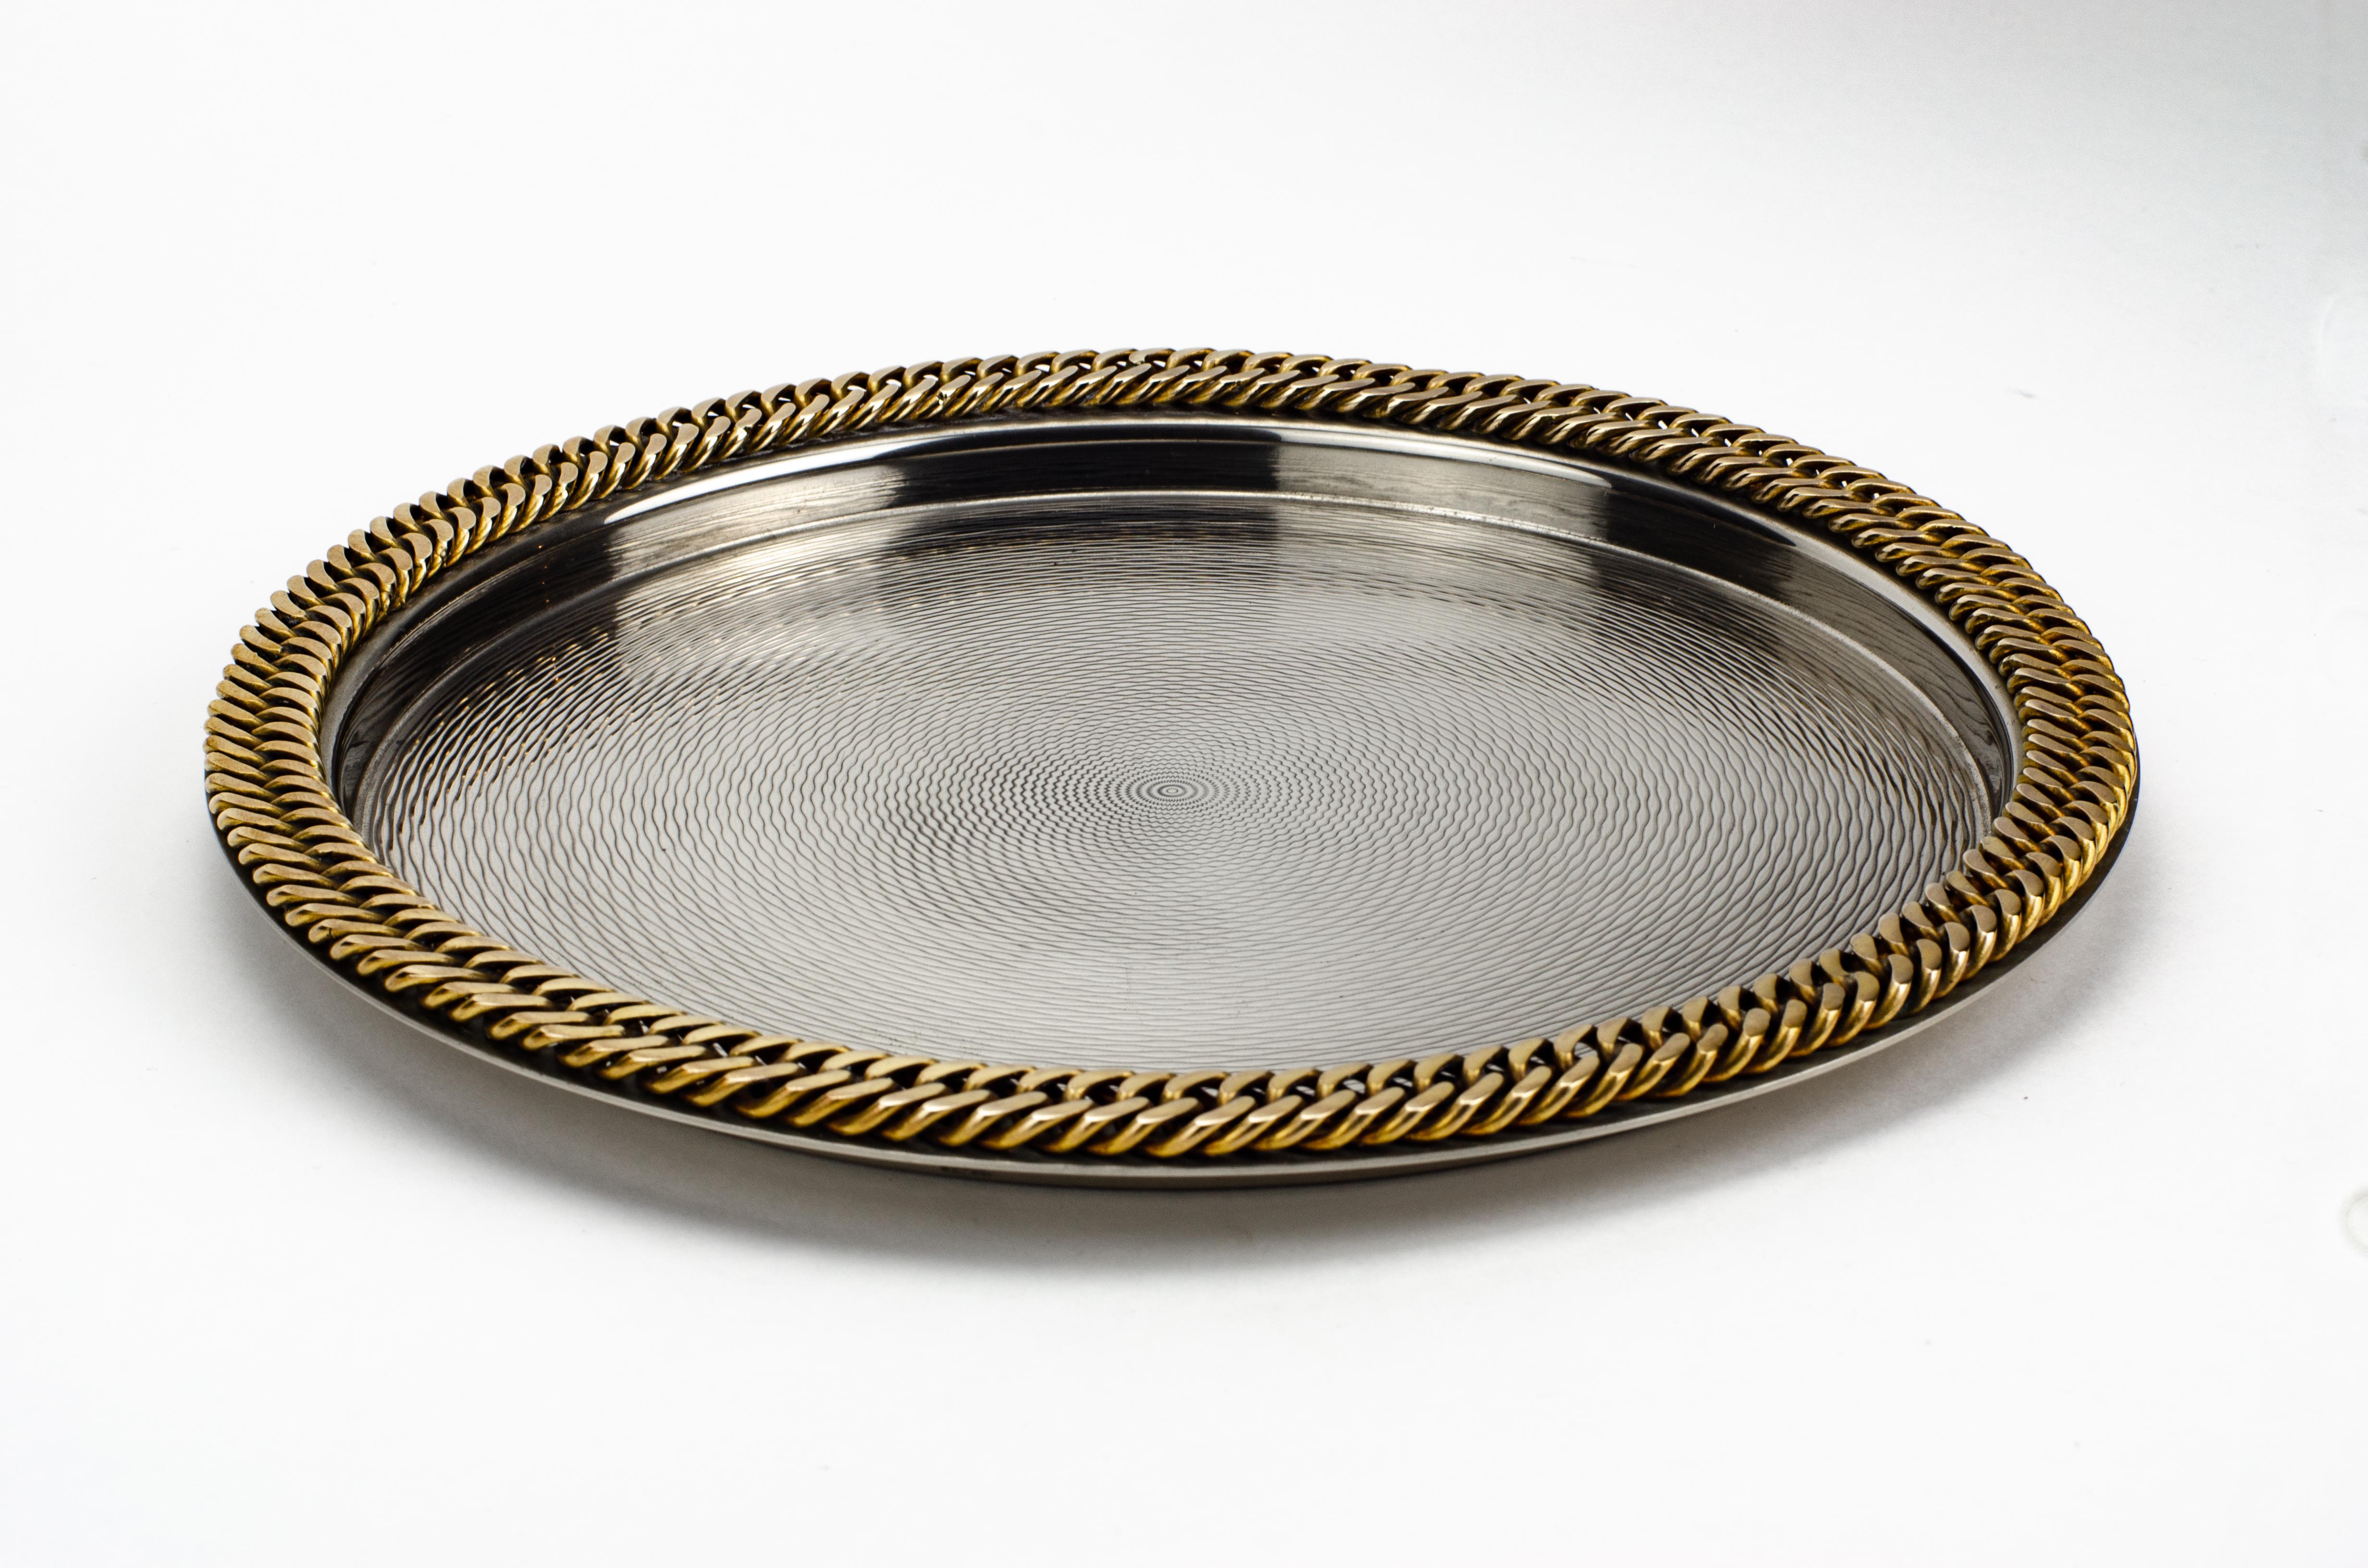 A finely executed tray by Hermès. Complete with a gilt chain link around the edge, as well as an engine-turned design engraved into the tray.
 
 